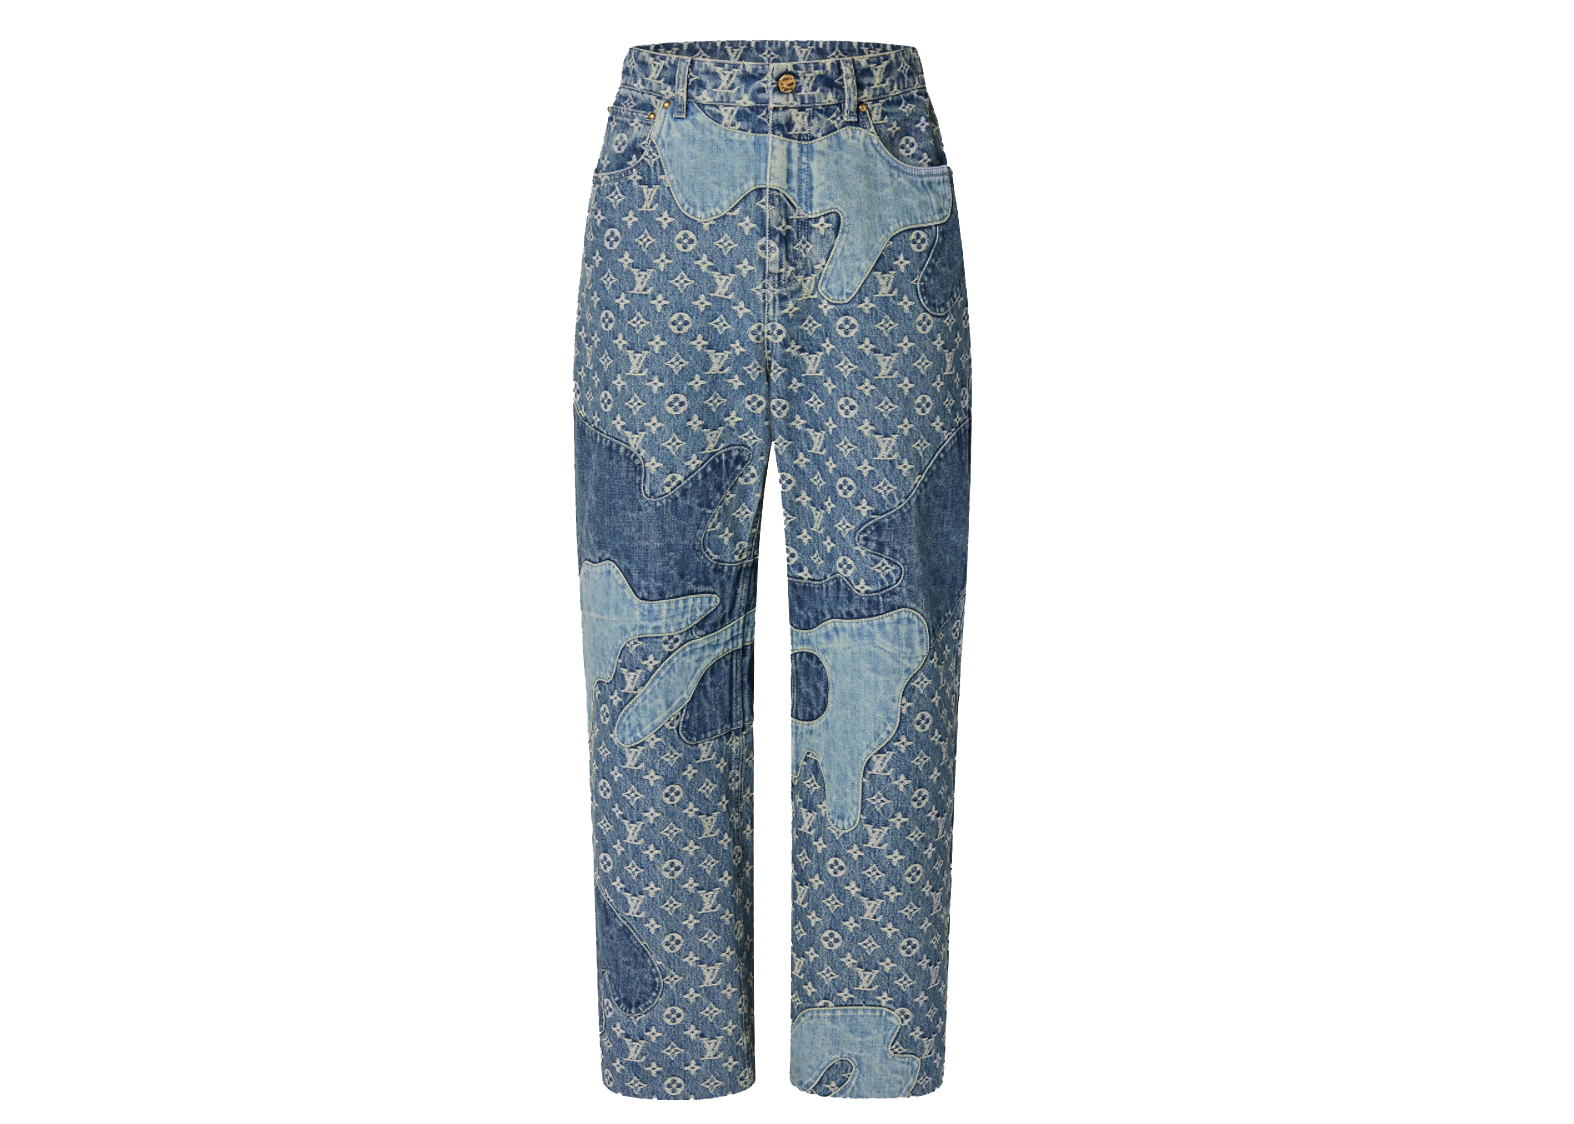 Patchwork Pants In Mens Pants for sale  eBay